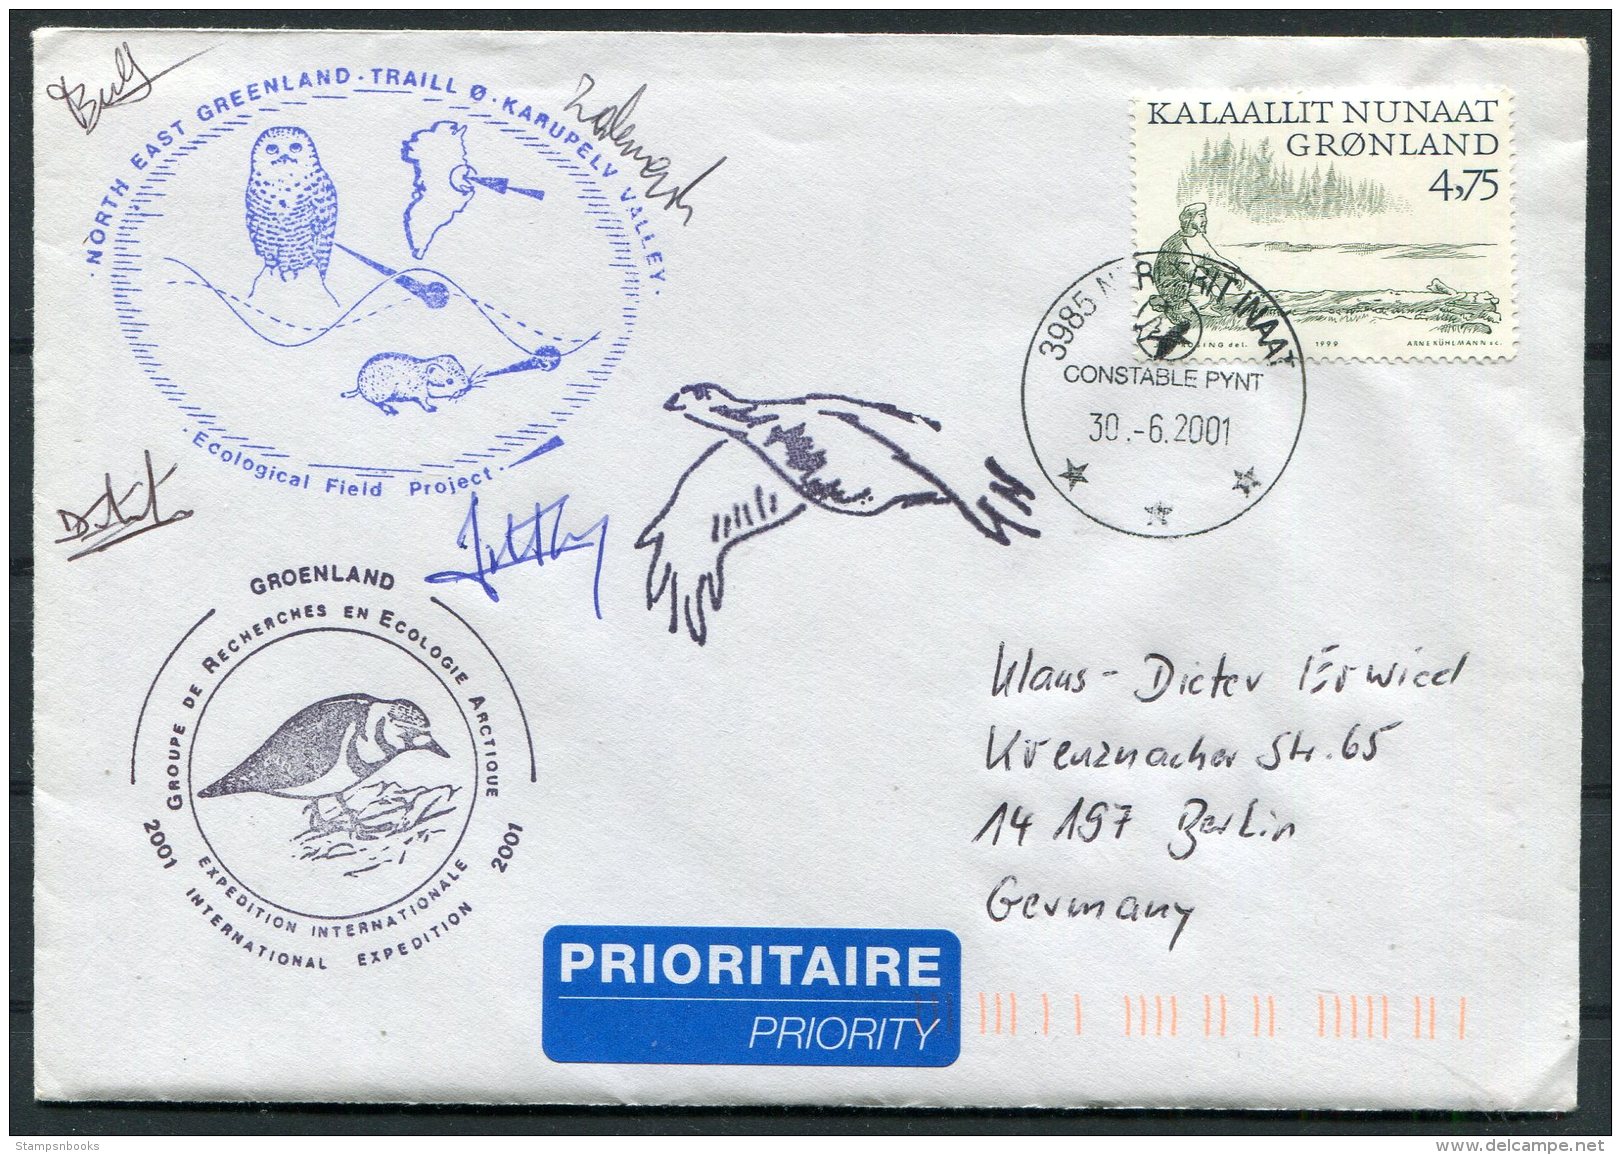 2001 North East Greenland, Karupelv Valley, Polar Owl Birds Research Arctic Expedition Signed Cover - Covers & Documents